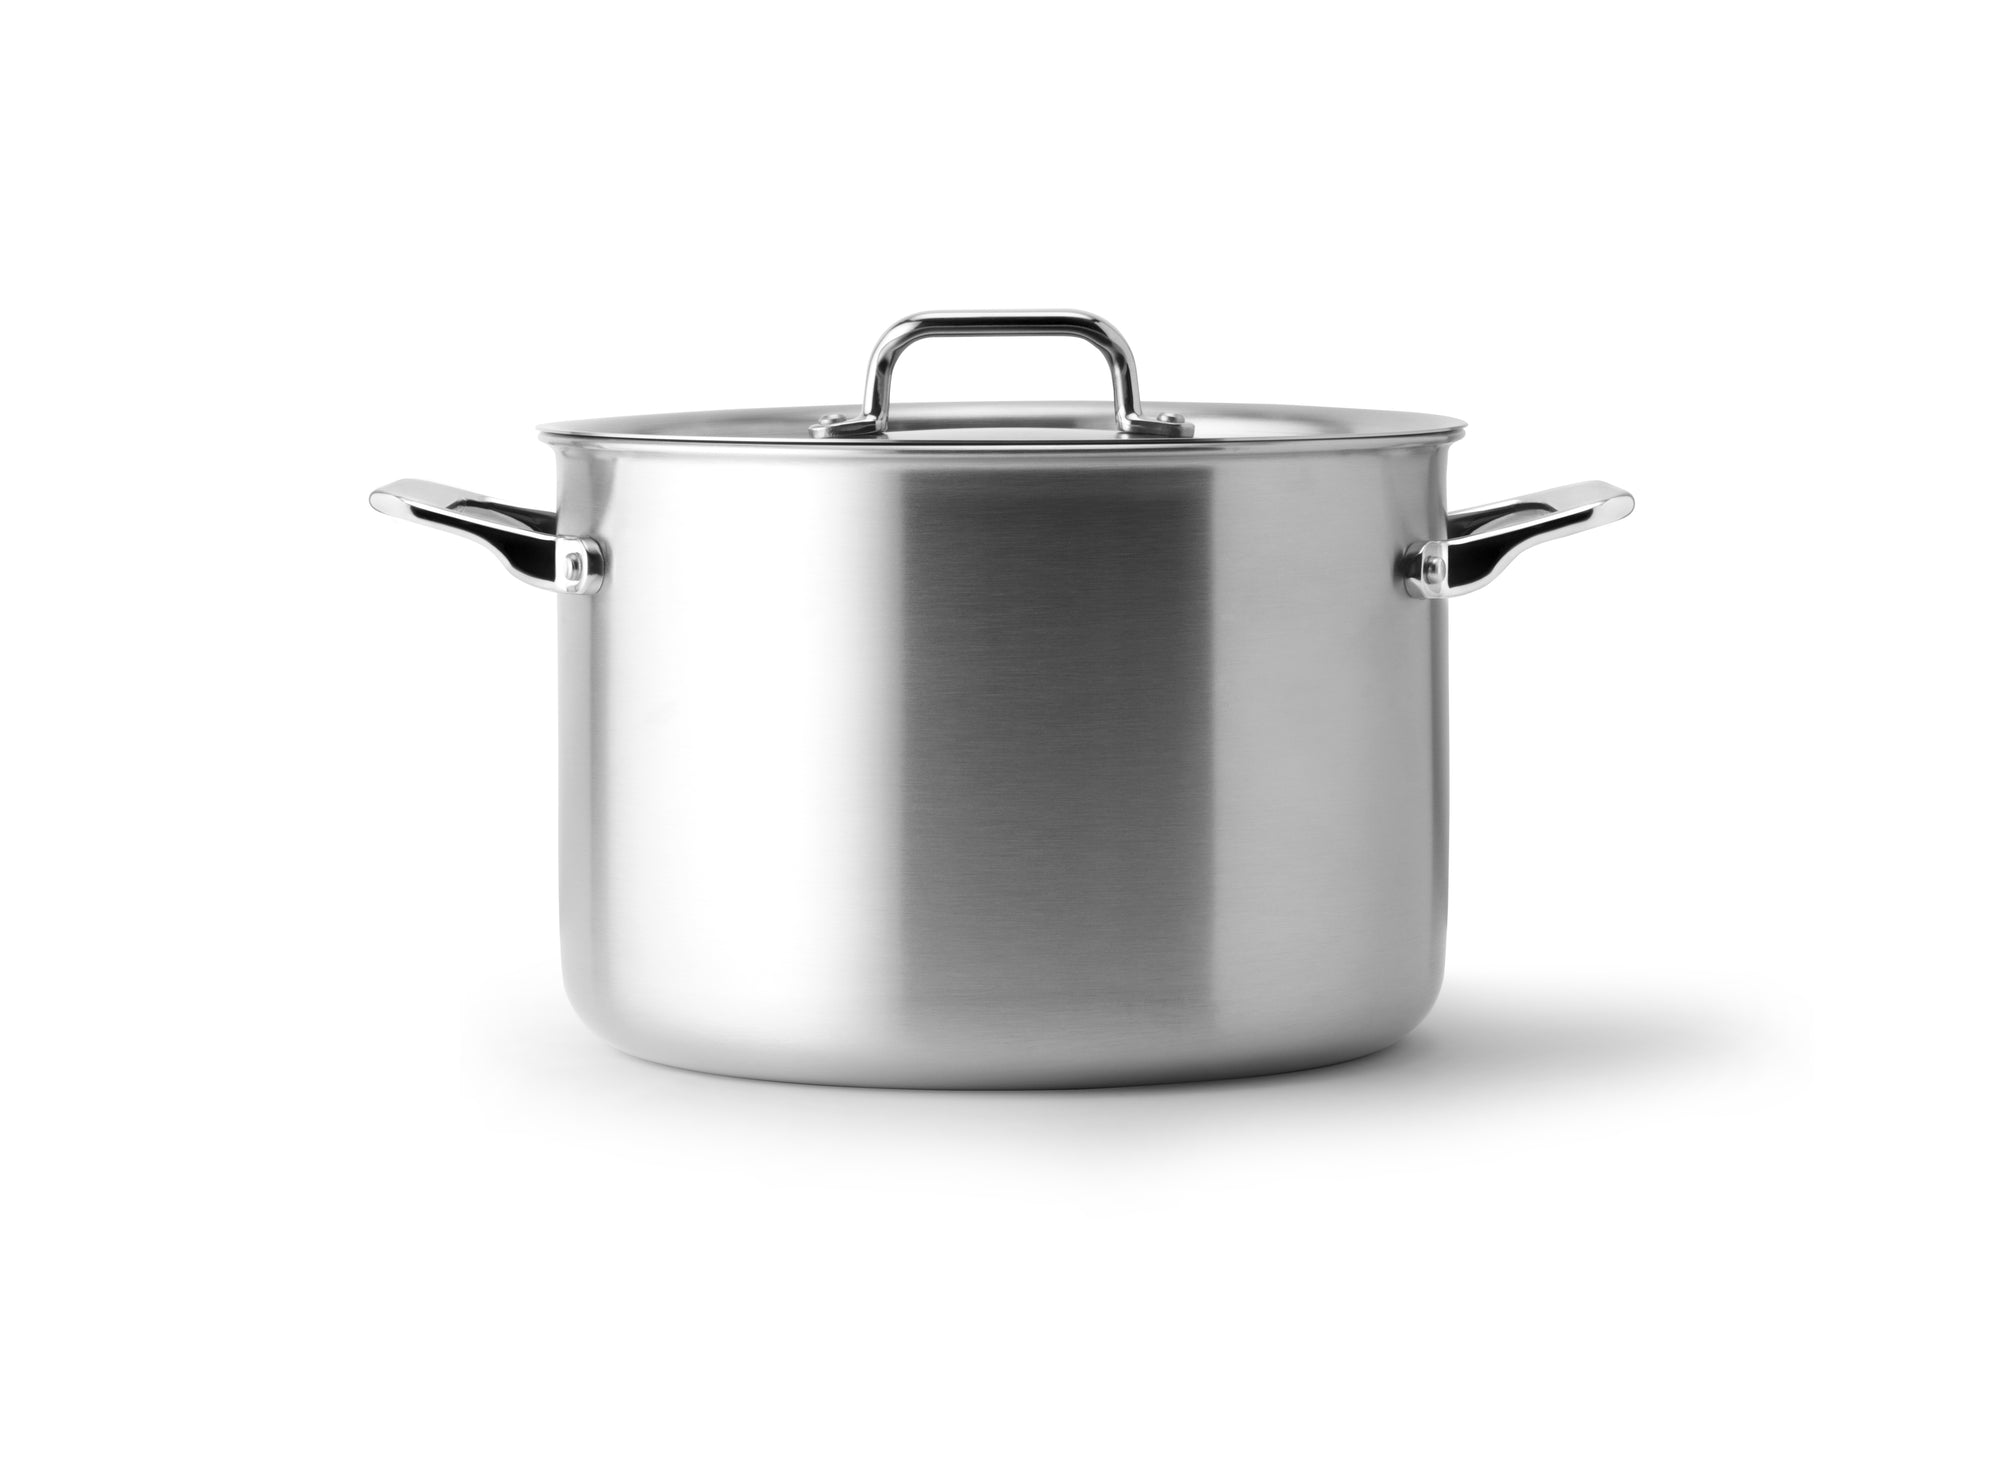 The Misen 8 QT Stockpot comes with a stainless steel lid.